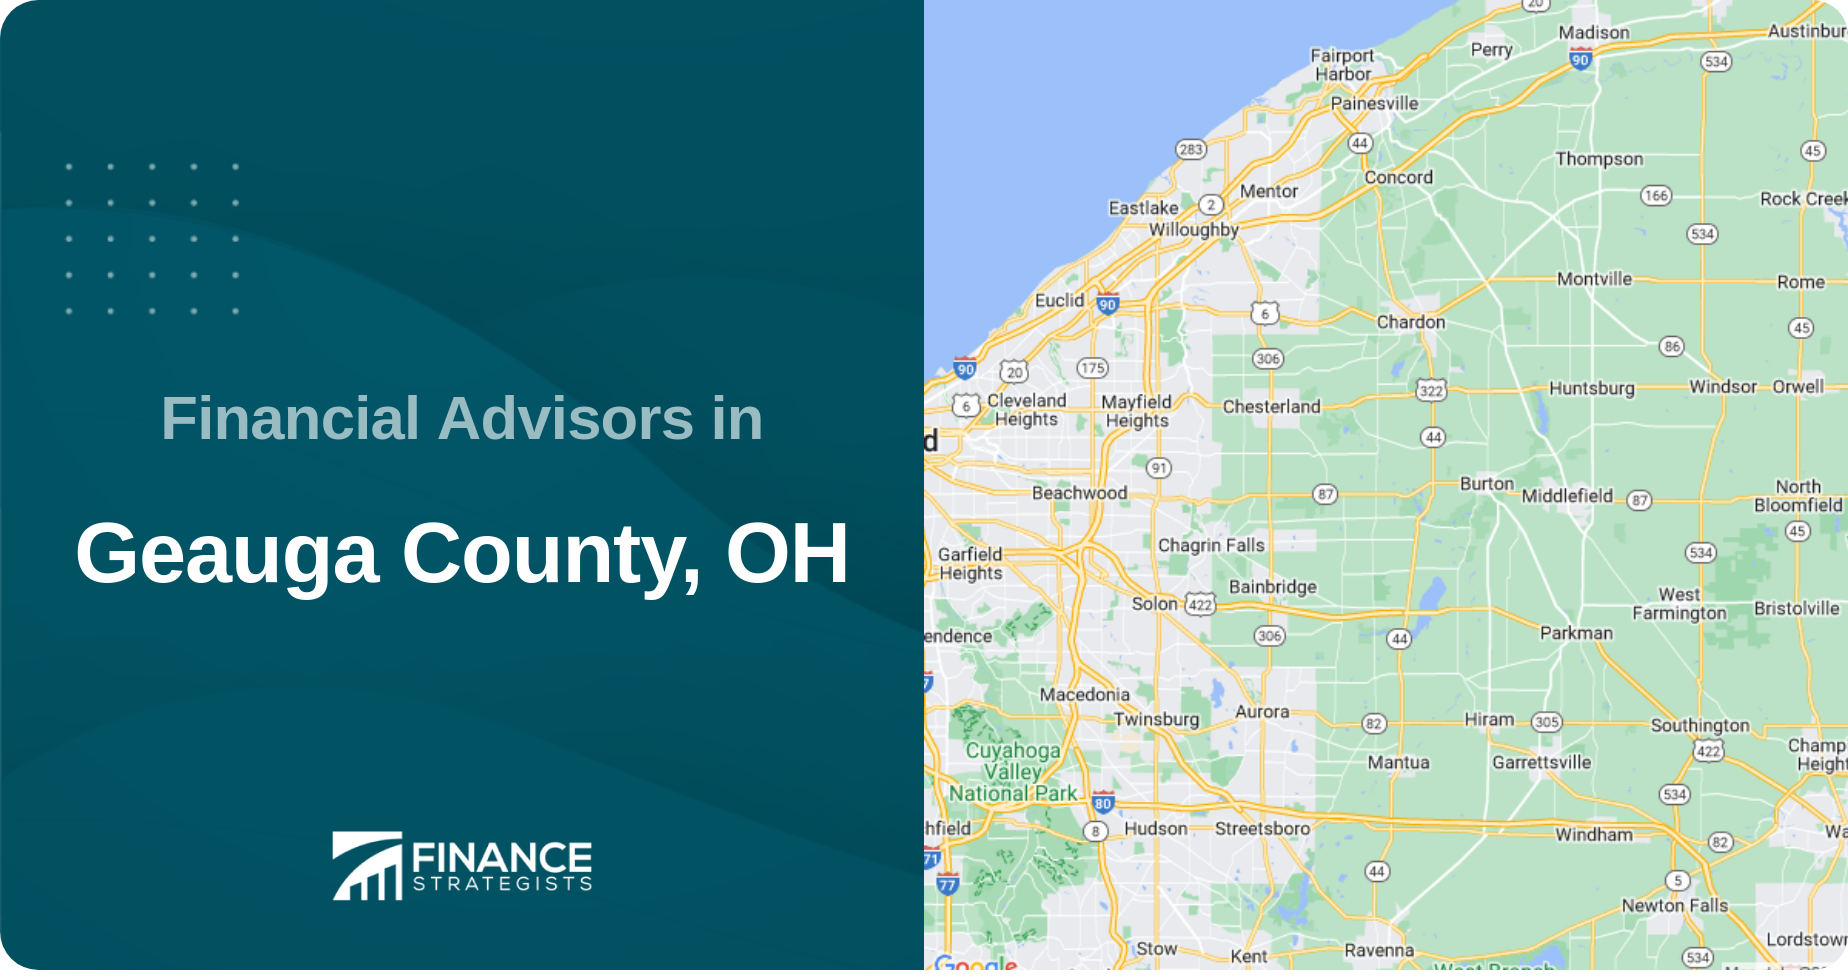 Financial Advisors in Geauga County, OH